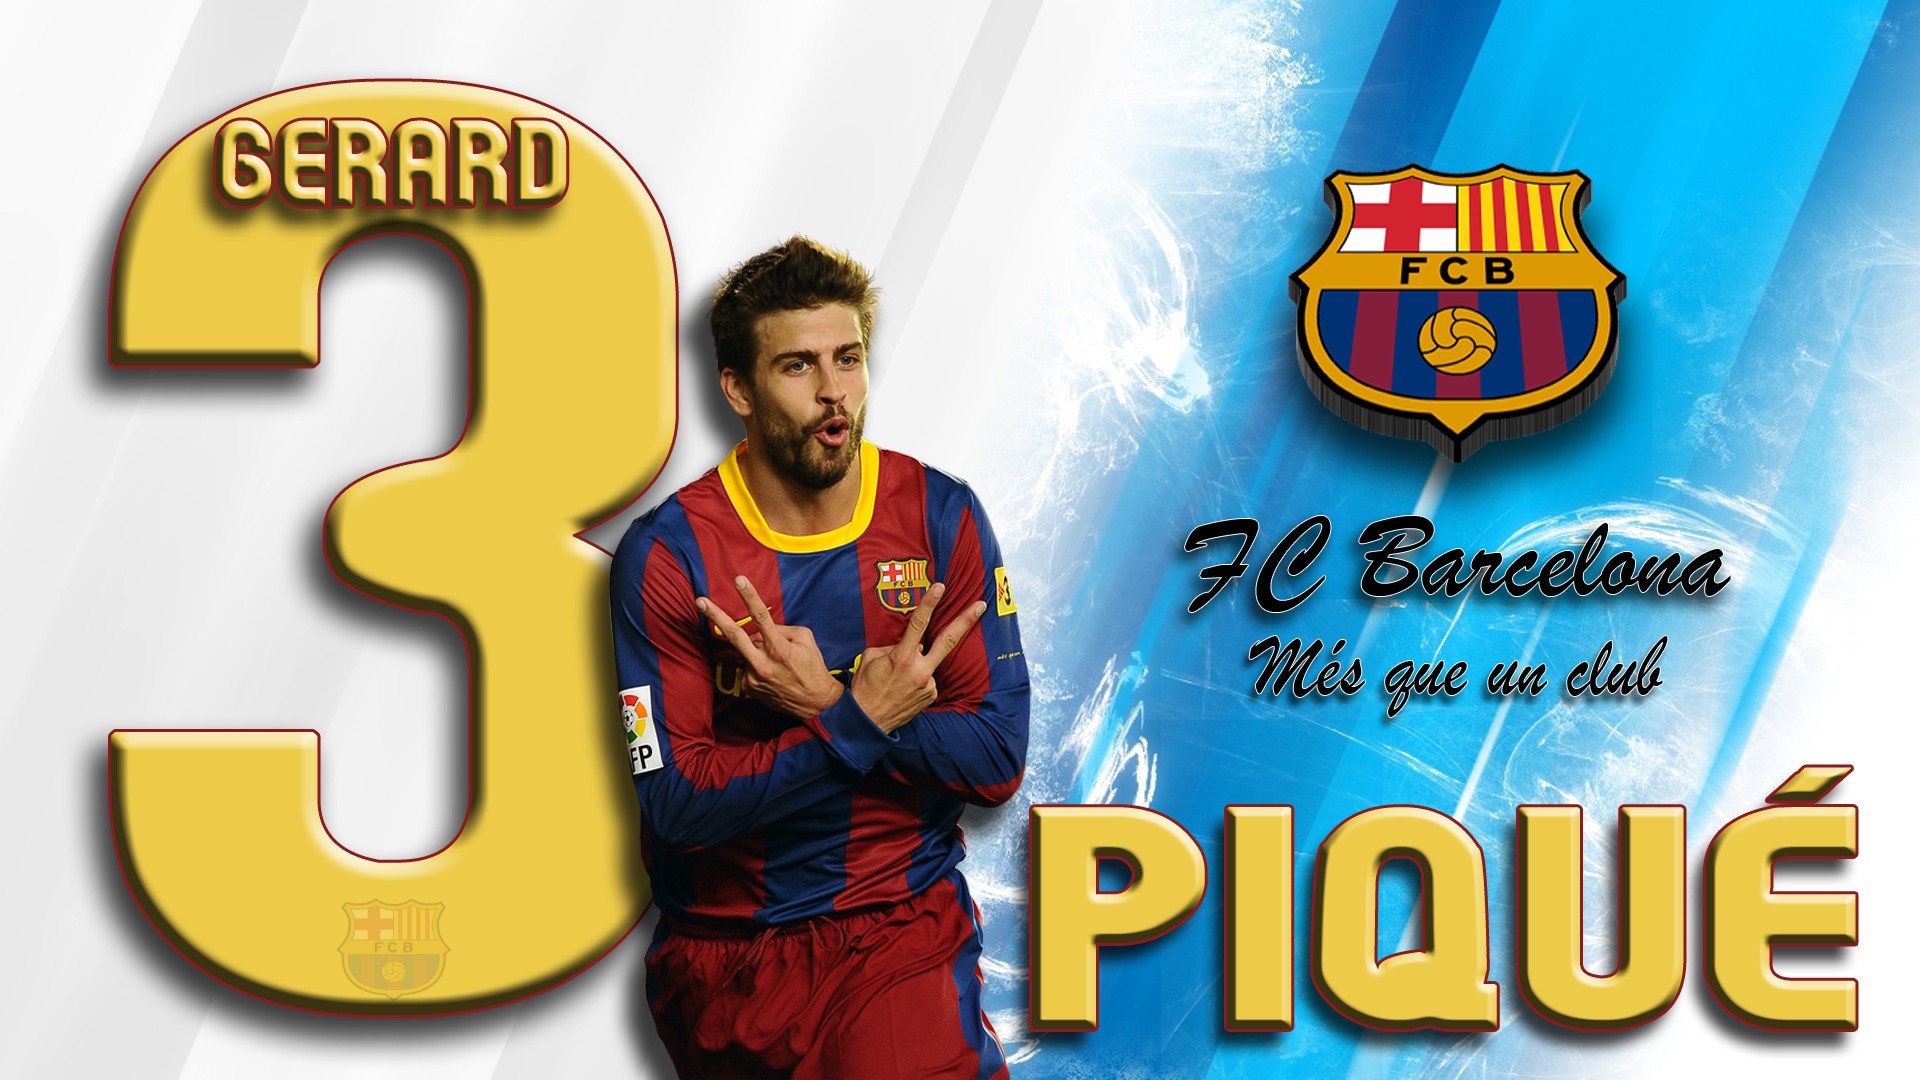 Gerard Pique Football Wallpaper Background And Picture